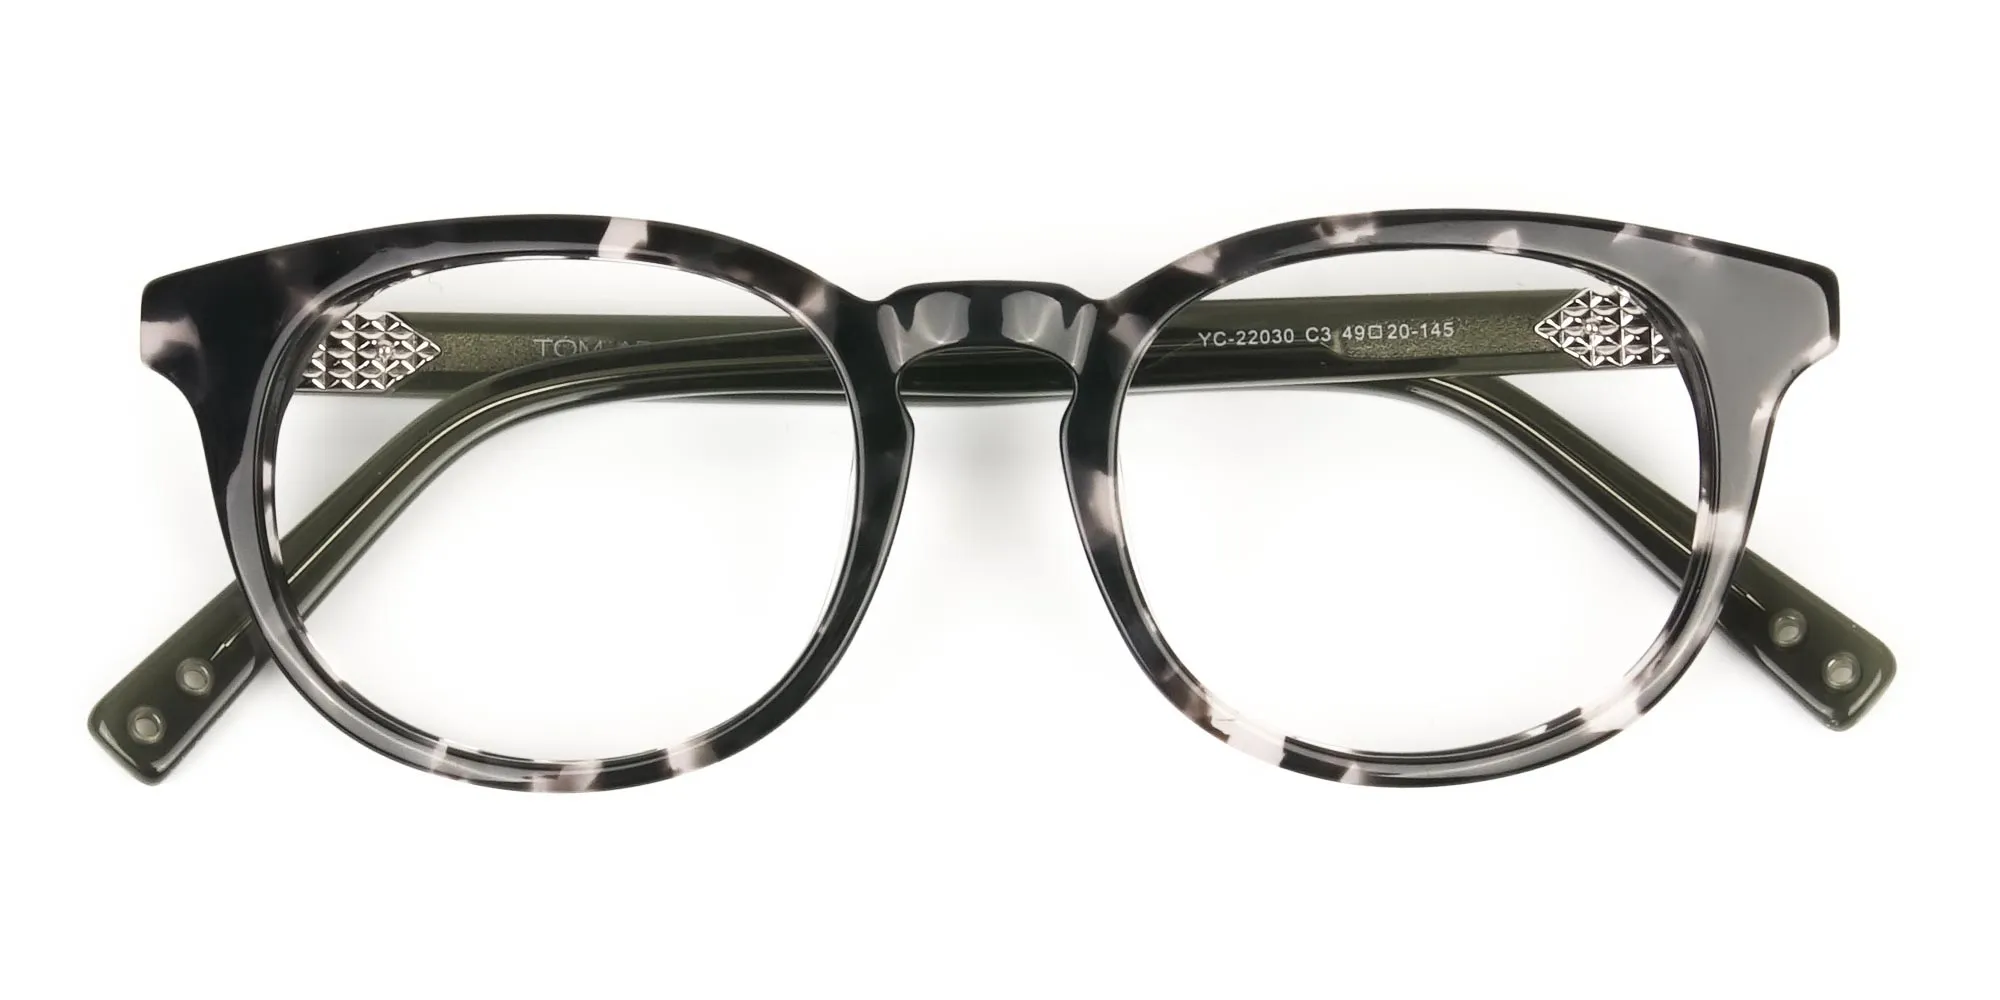 Marble Grey & Translucent Olive Green Round Glasses - 2